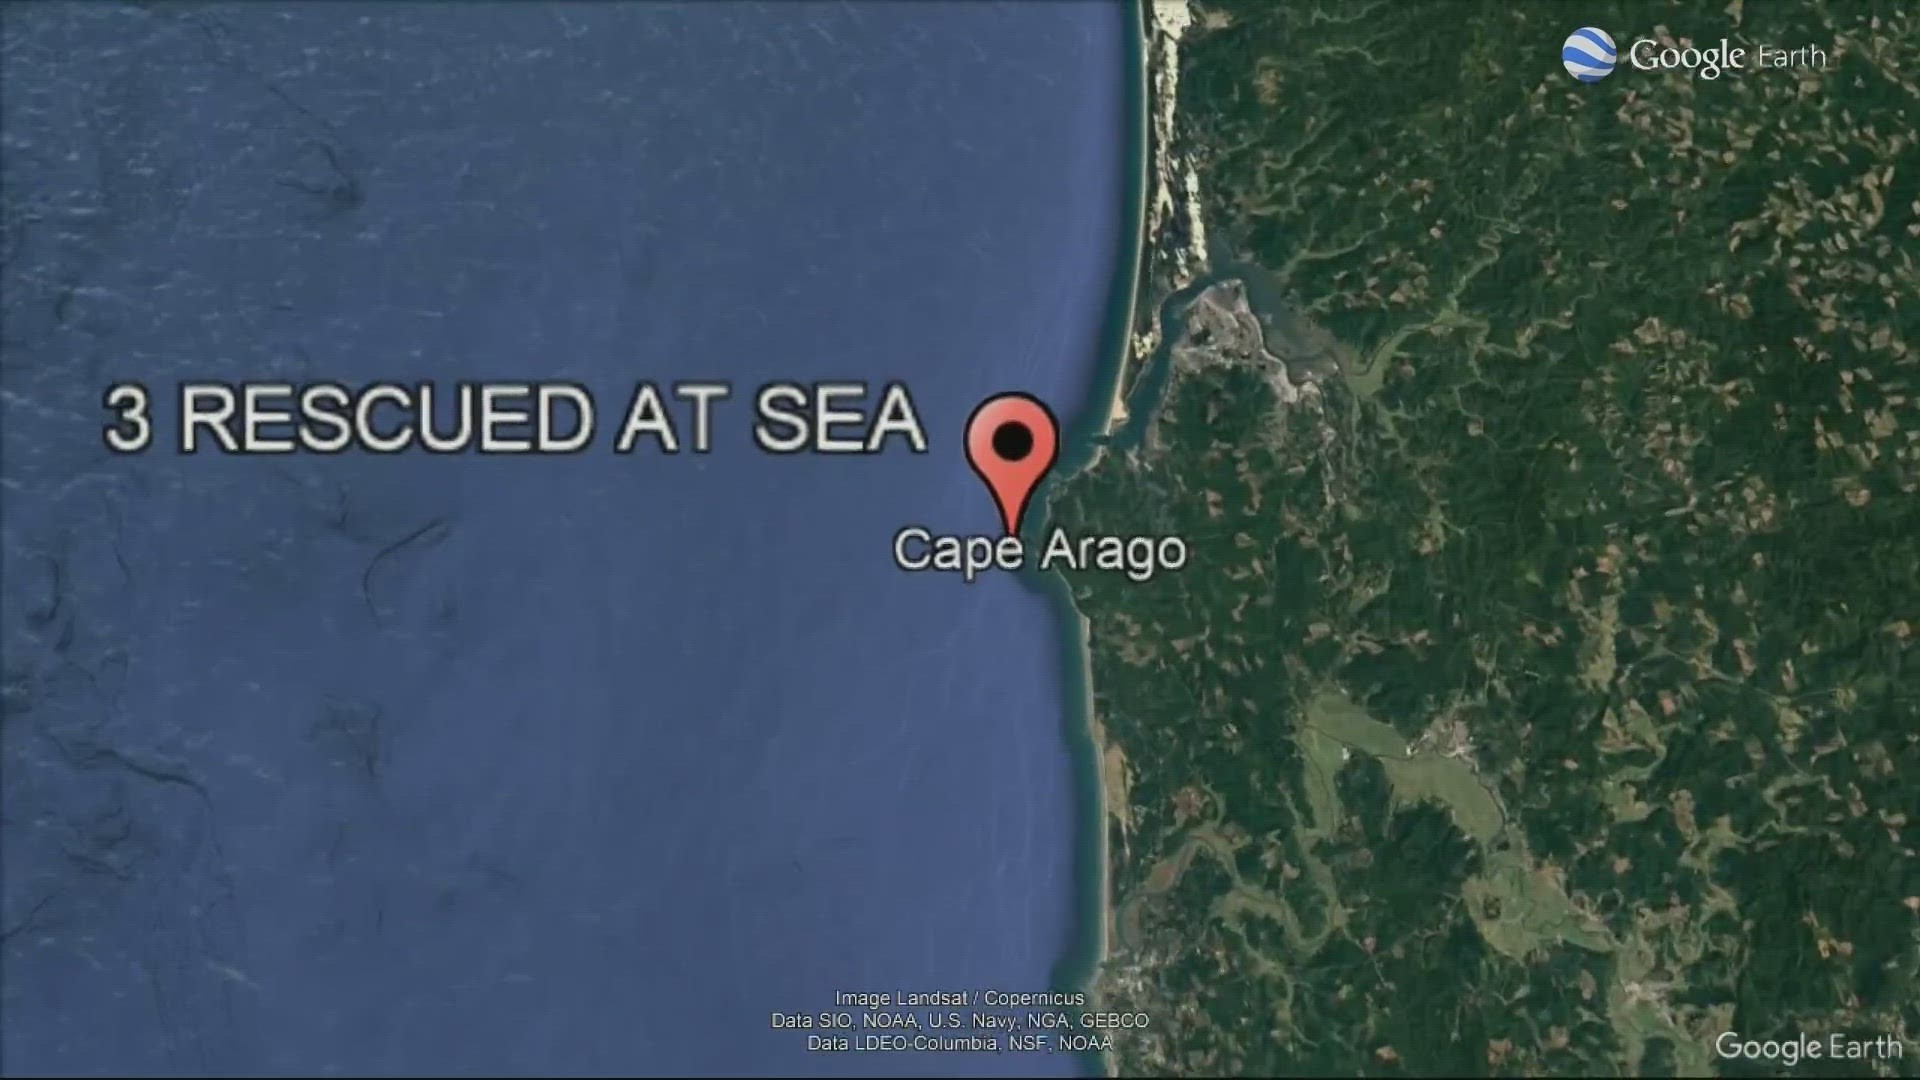 The people, who were wearing life jackets, were rescued from the sea after their 17-foot fishing boat sunk near Cape Arago, about 15 miles southwest of Coos Bay.